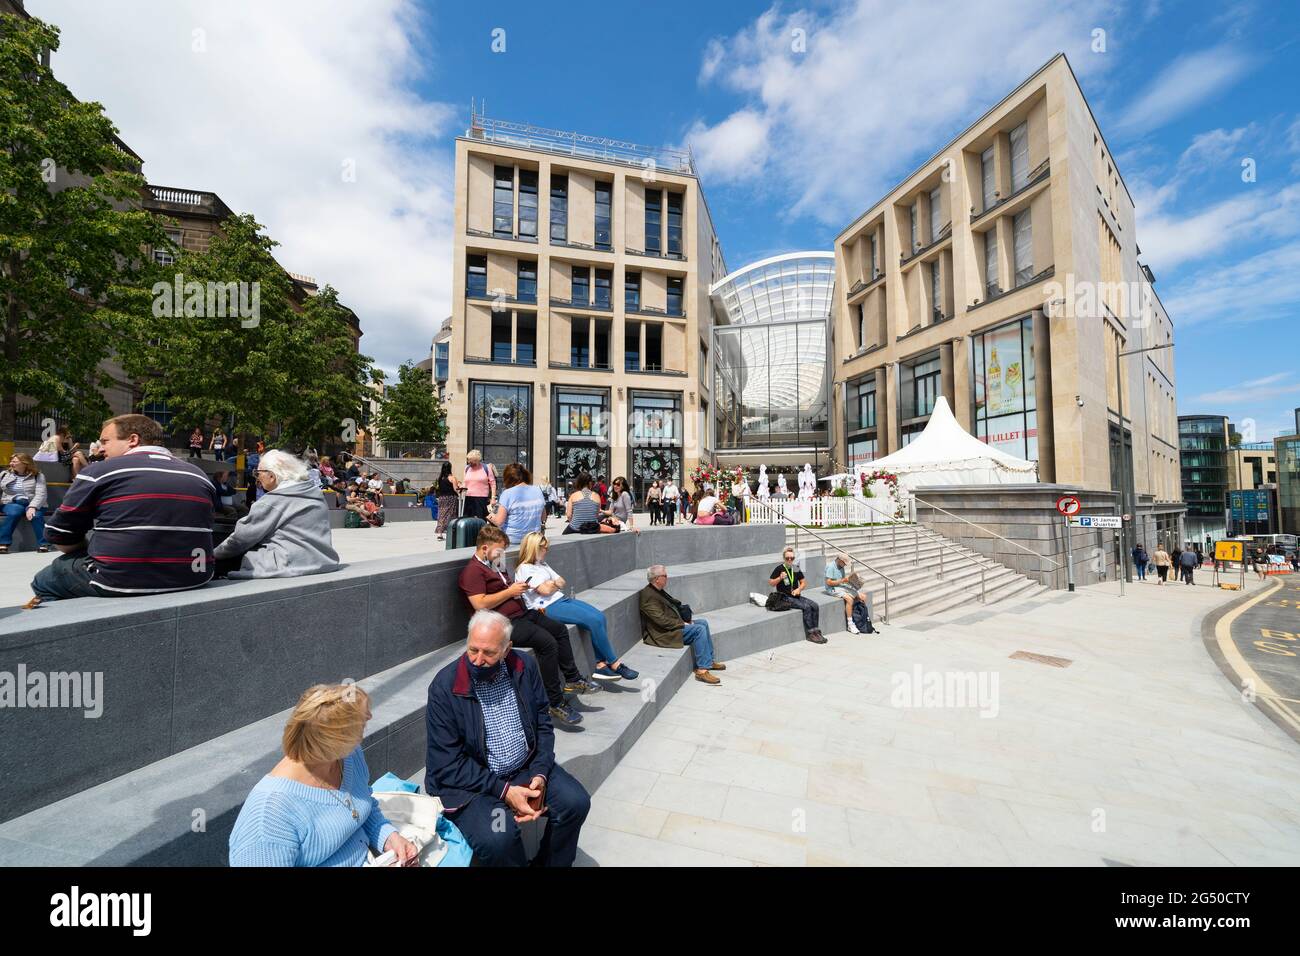 Edinburgh, Scotland, UK. 24 June 2021. First images of the new St James Quarter which opened this morning in Edinburgh. The large retail and residential complex replaced the St James Centre which occupied the site for many years. Pic; Members of the  public at entrance to mall on Leith Street .Iain Masterton/Alamy Live News Stock Photo